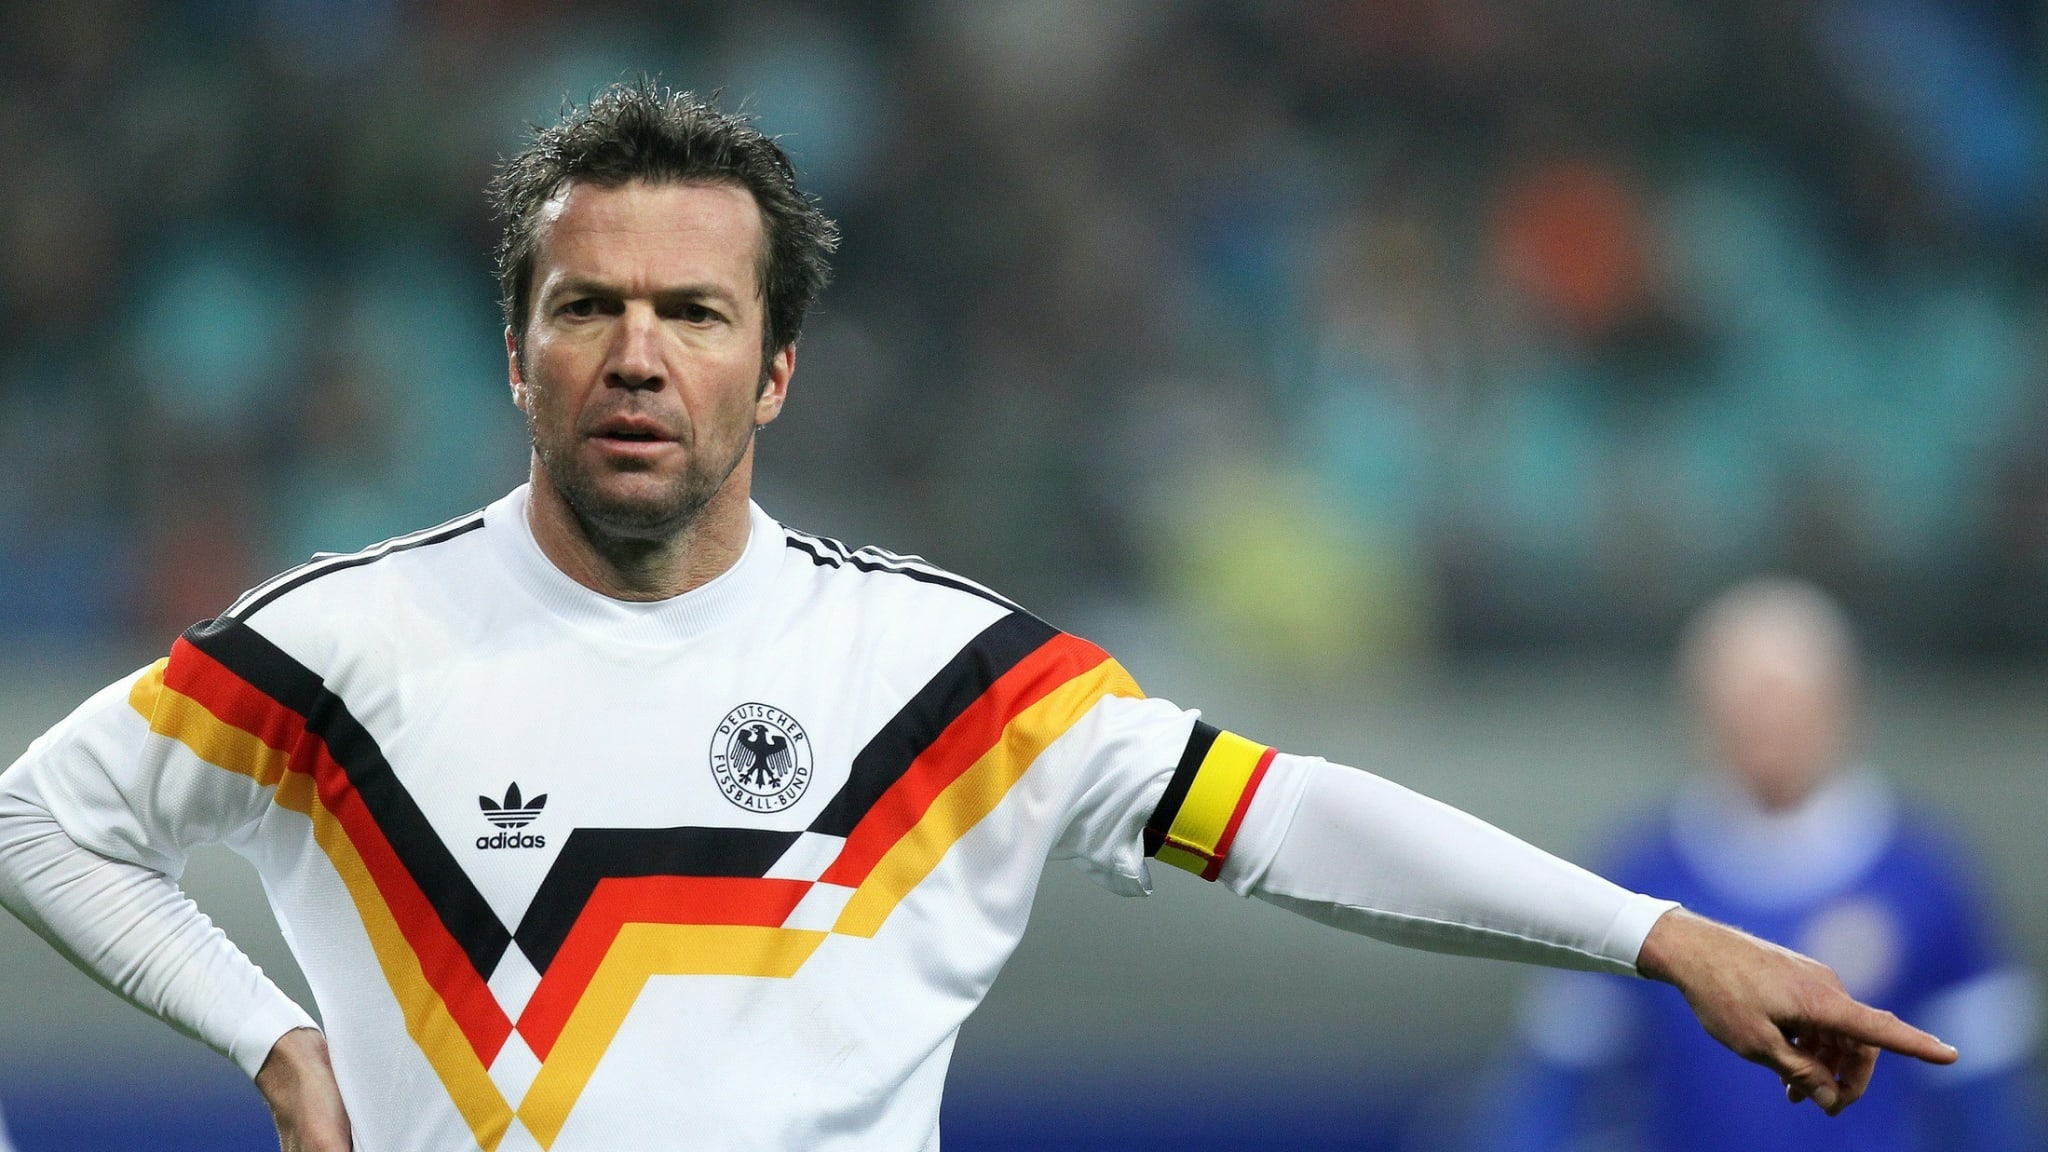 UtdArena on Twitter: "In 1990, Lothar Matthäus won the then  European-centric Ballon d'Or award after captaining West Germany to World  Cup victory. A year later, after a stellar season with Internazionale, he